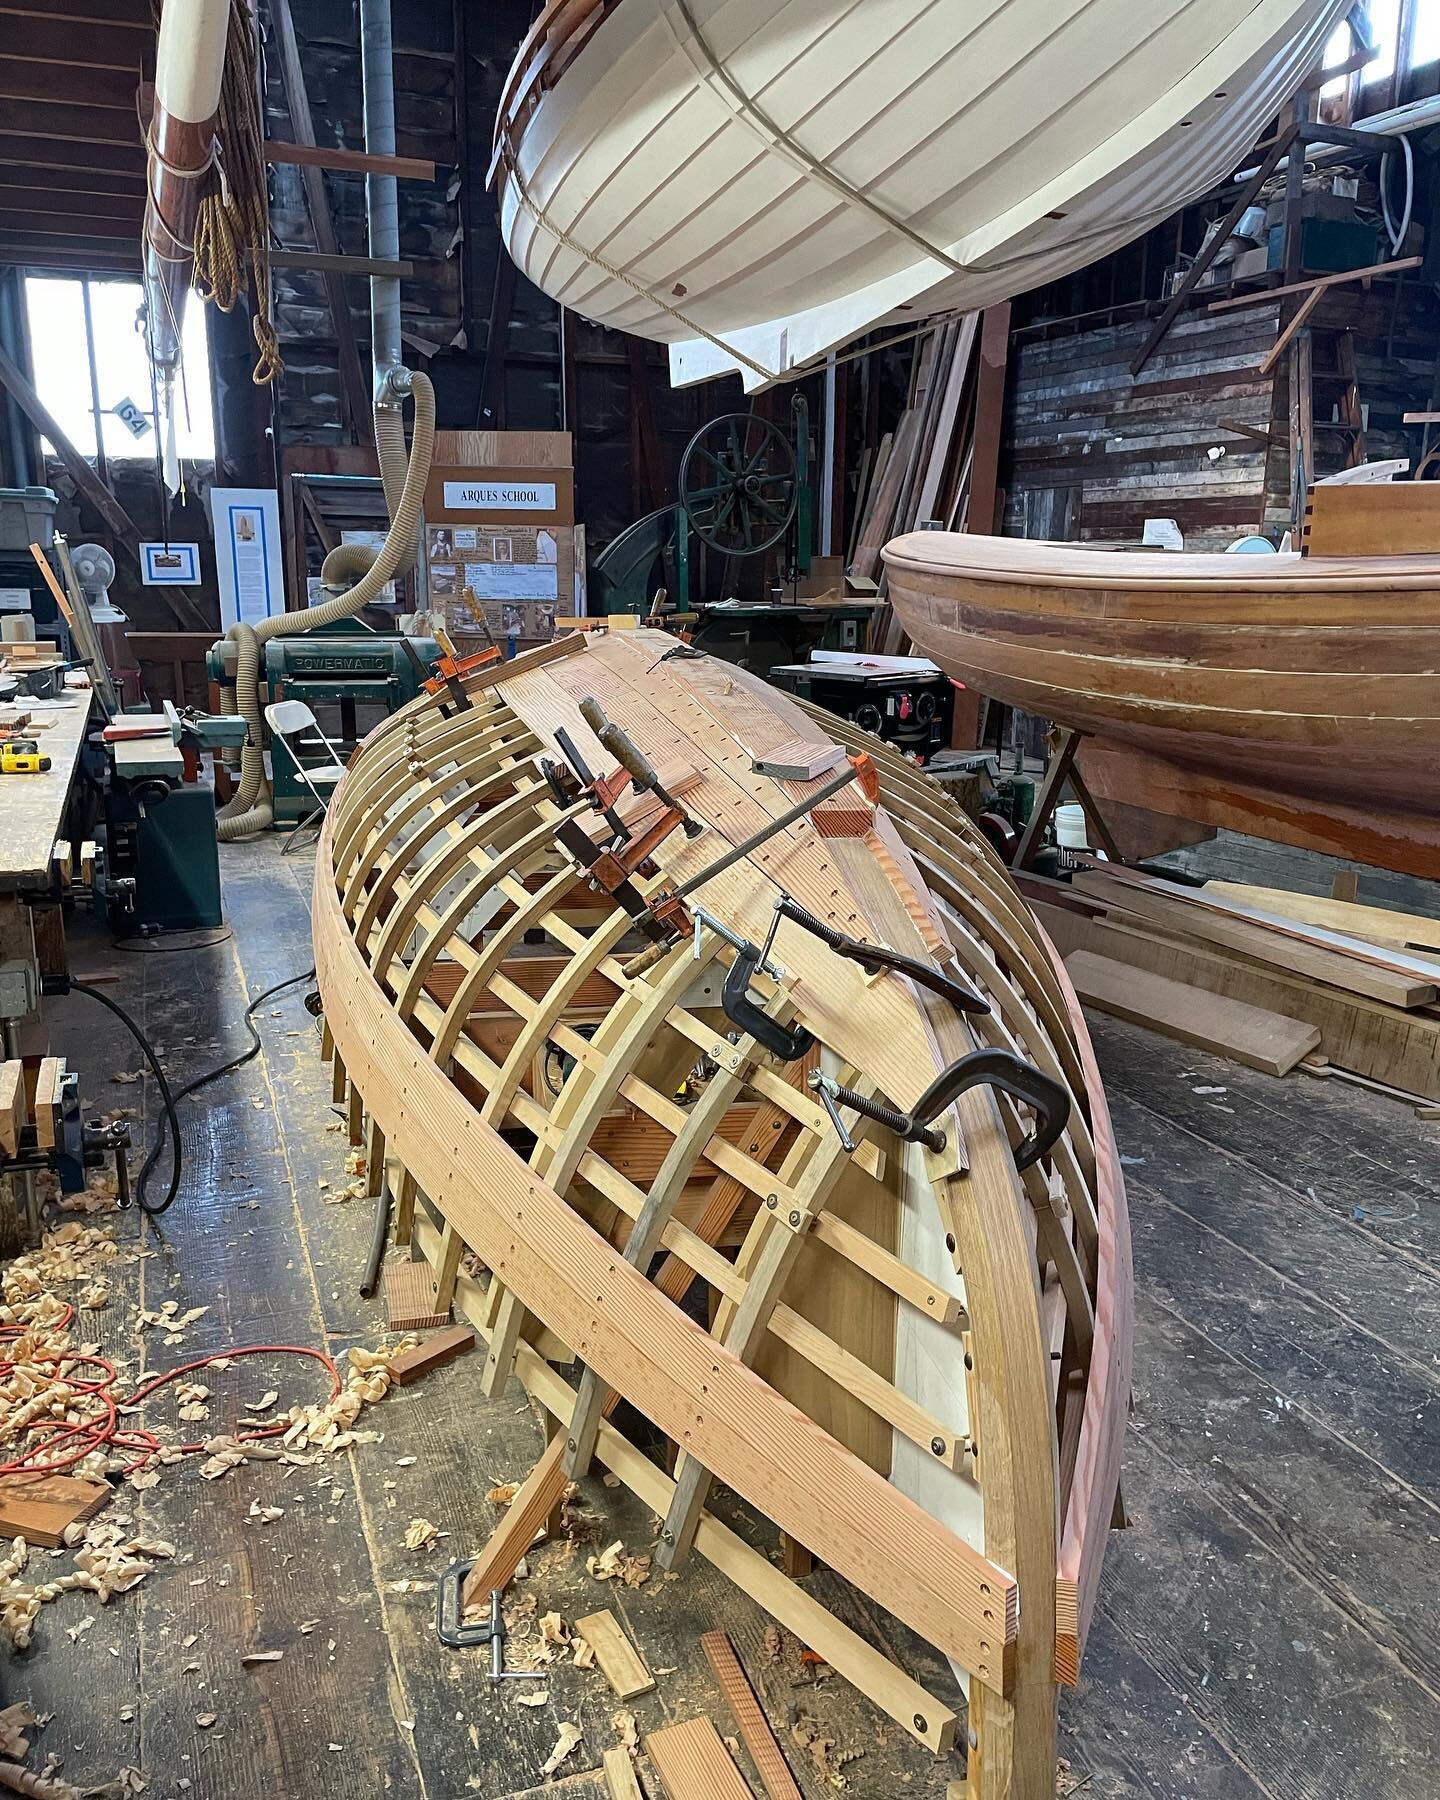 Much to my own surprise and delight, I find myself once again on the Sausalito waterfront, this time dedicating my work exclusively to traditionally built wooden boats of local historical significance. I&rsquo;m thrilled to announce that I&rsquo;ve r